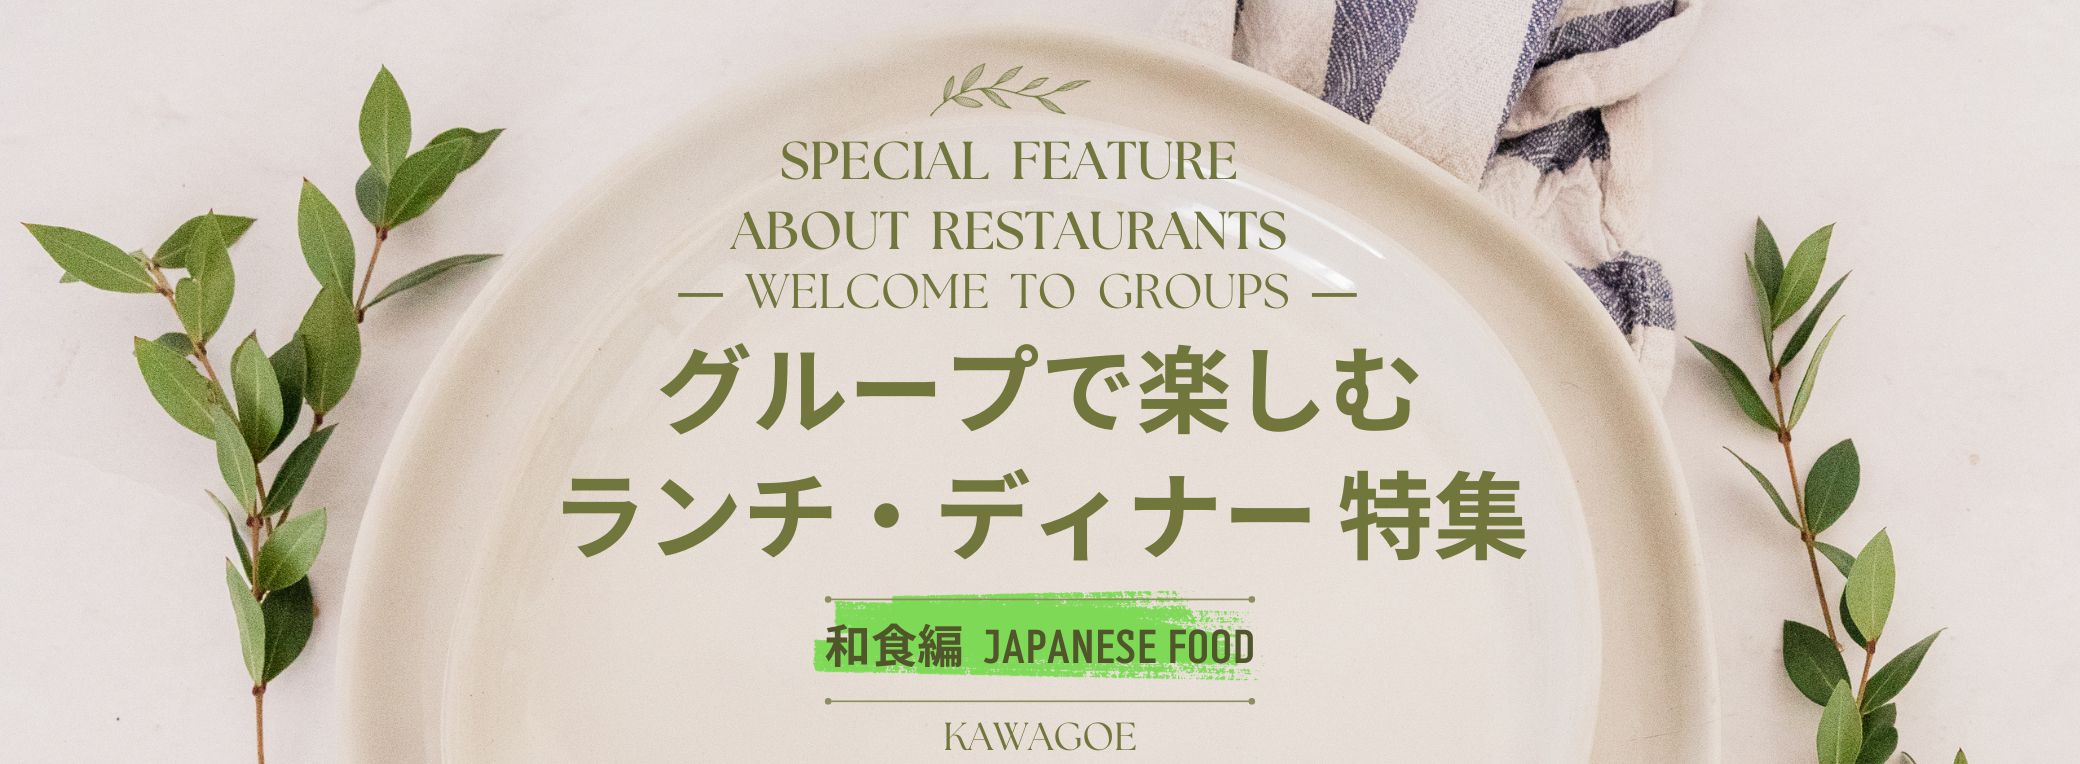 🍴 Lunch and dinner special for groups - Japanese food edition - 🎉